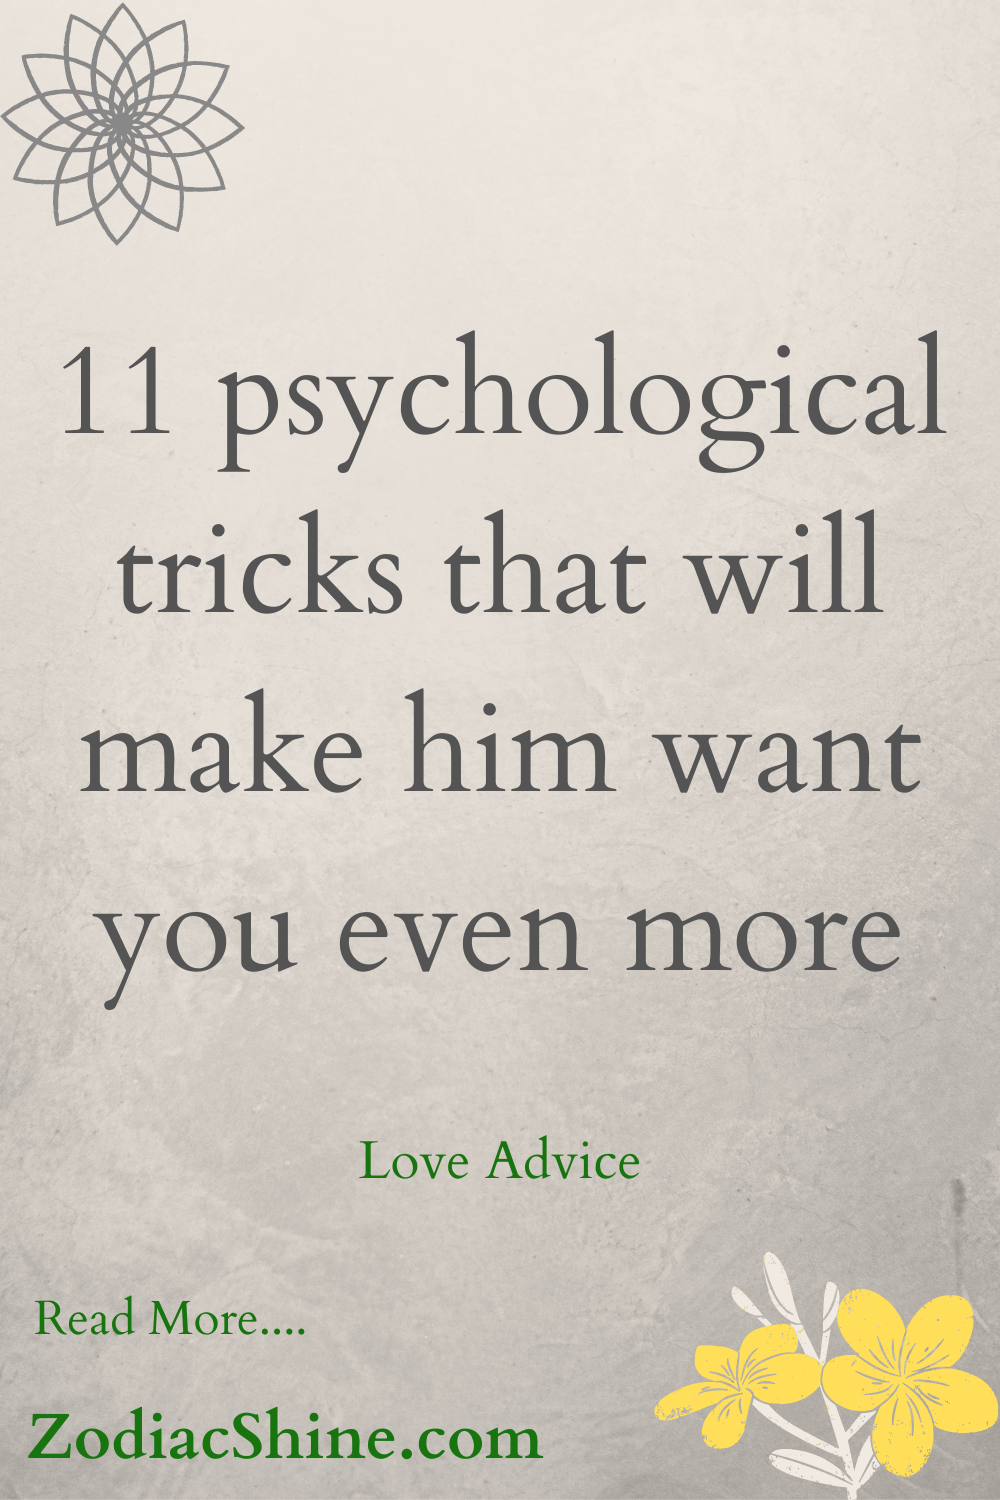 11 psychological tricks that will make him want you even more